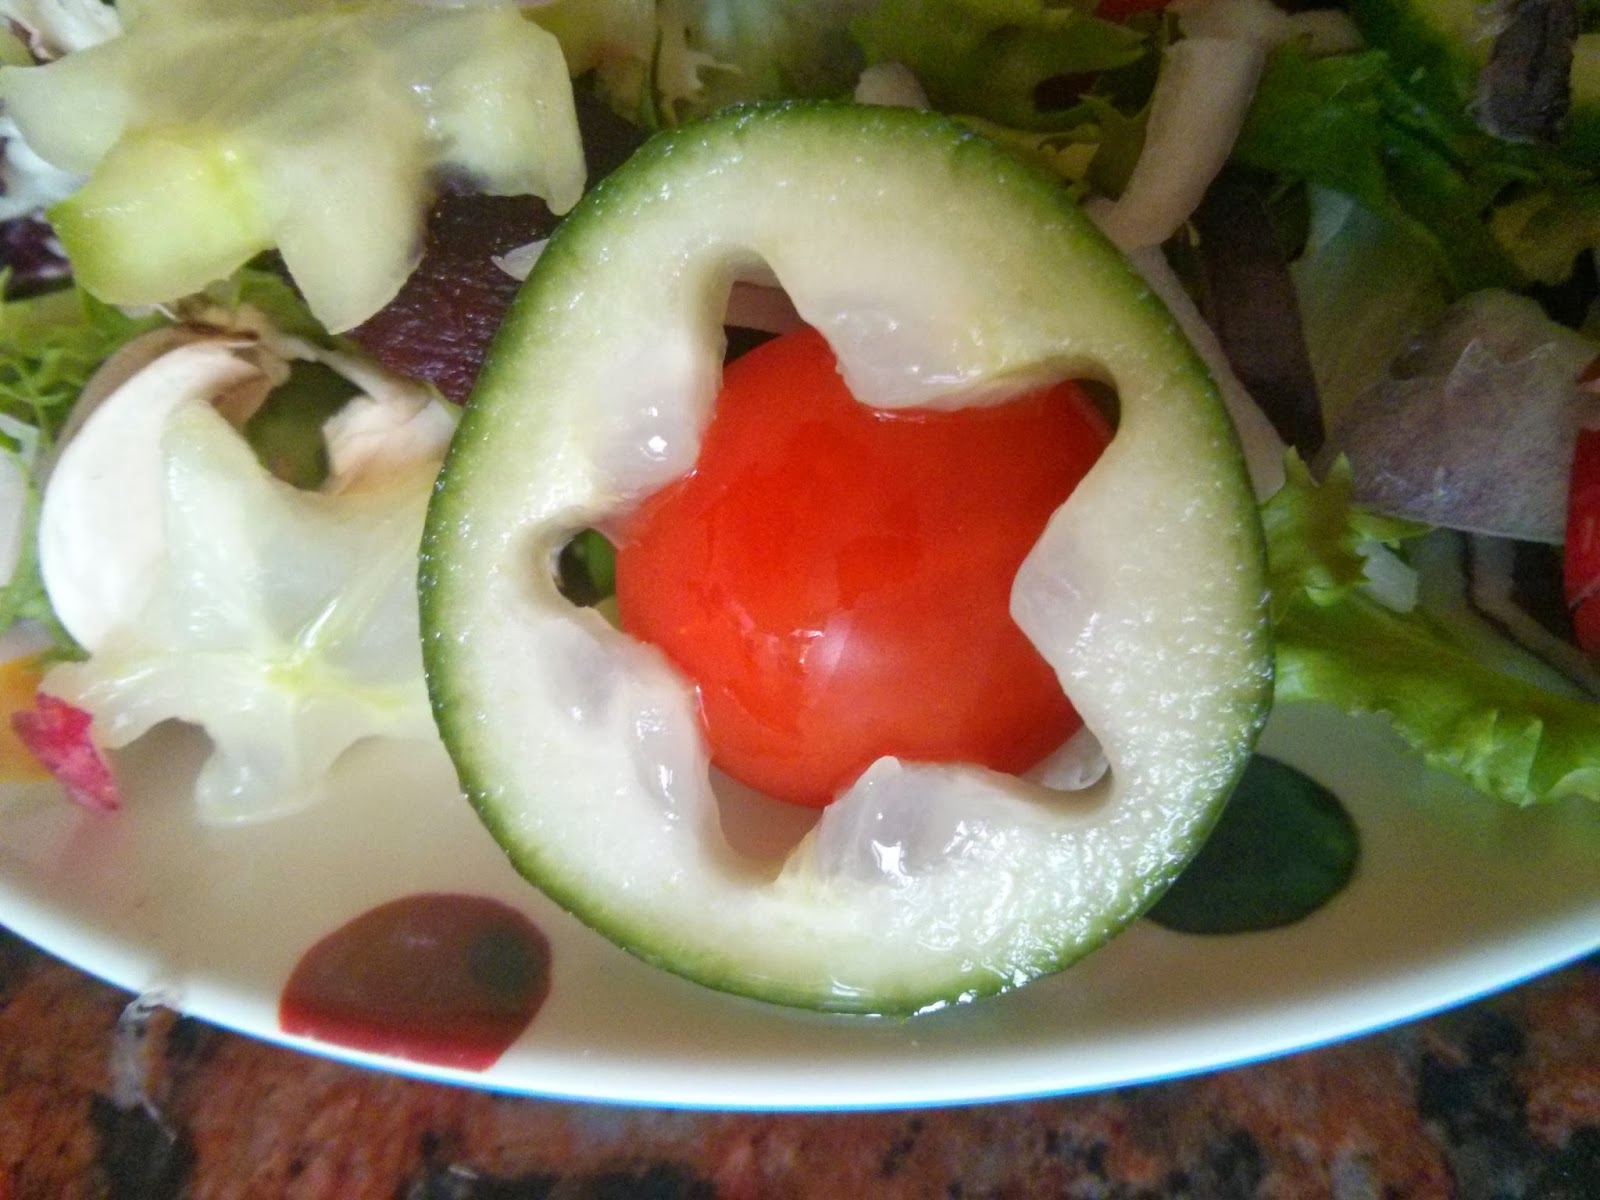 Cucumber with Star cut out using Pop Chef